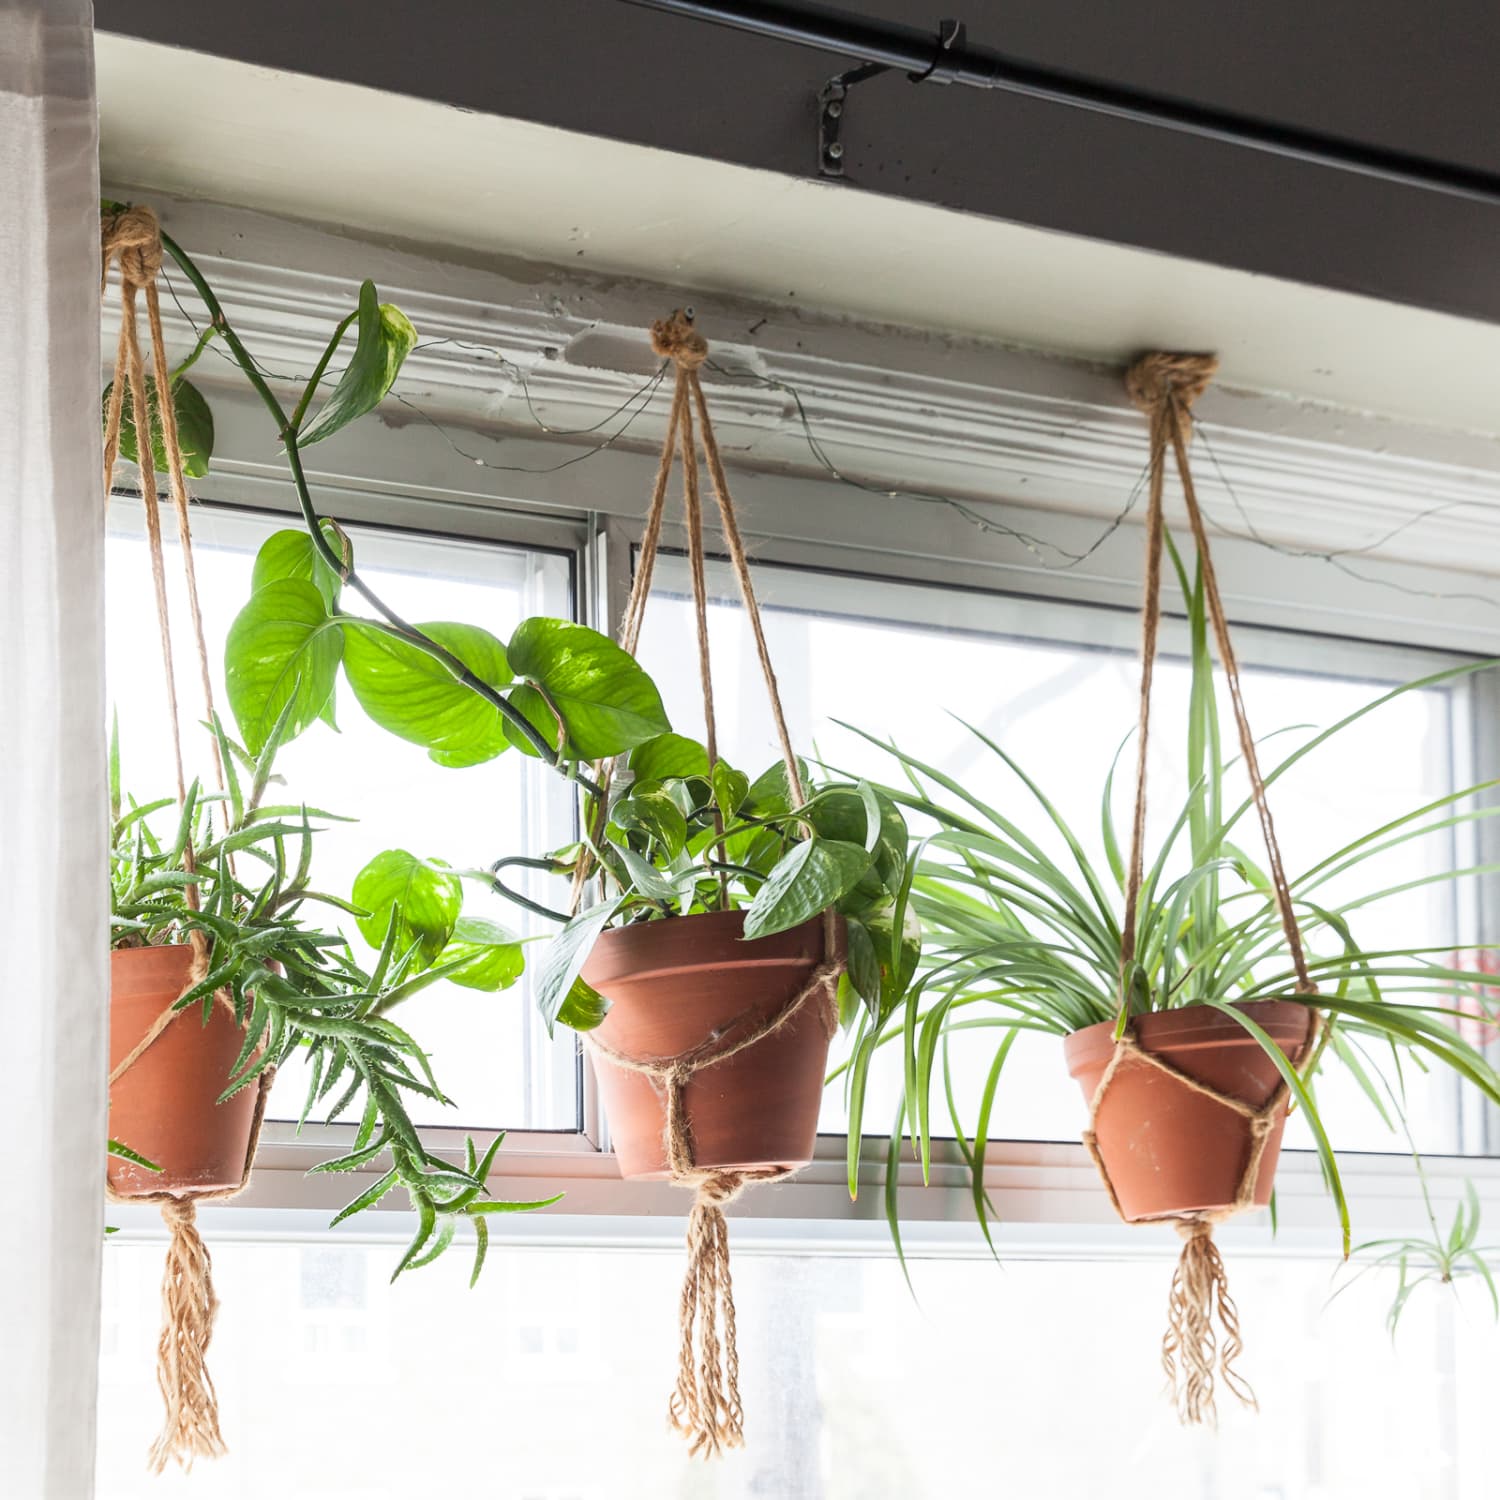 Hang Plants in the Bathroom for a Spa-like Atmosphere